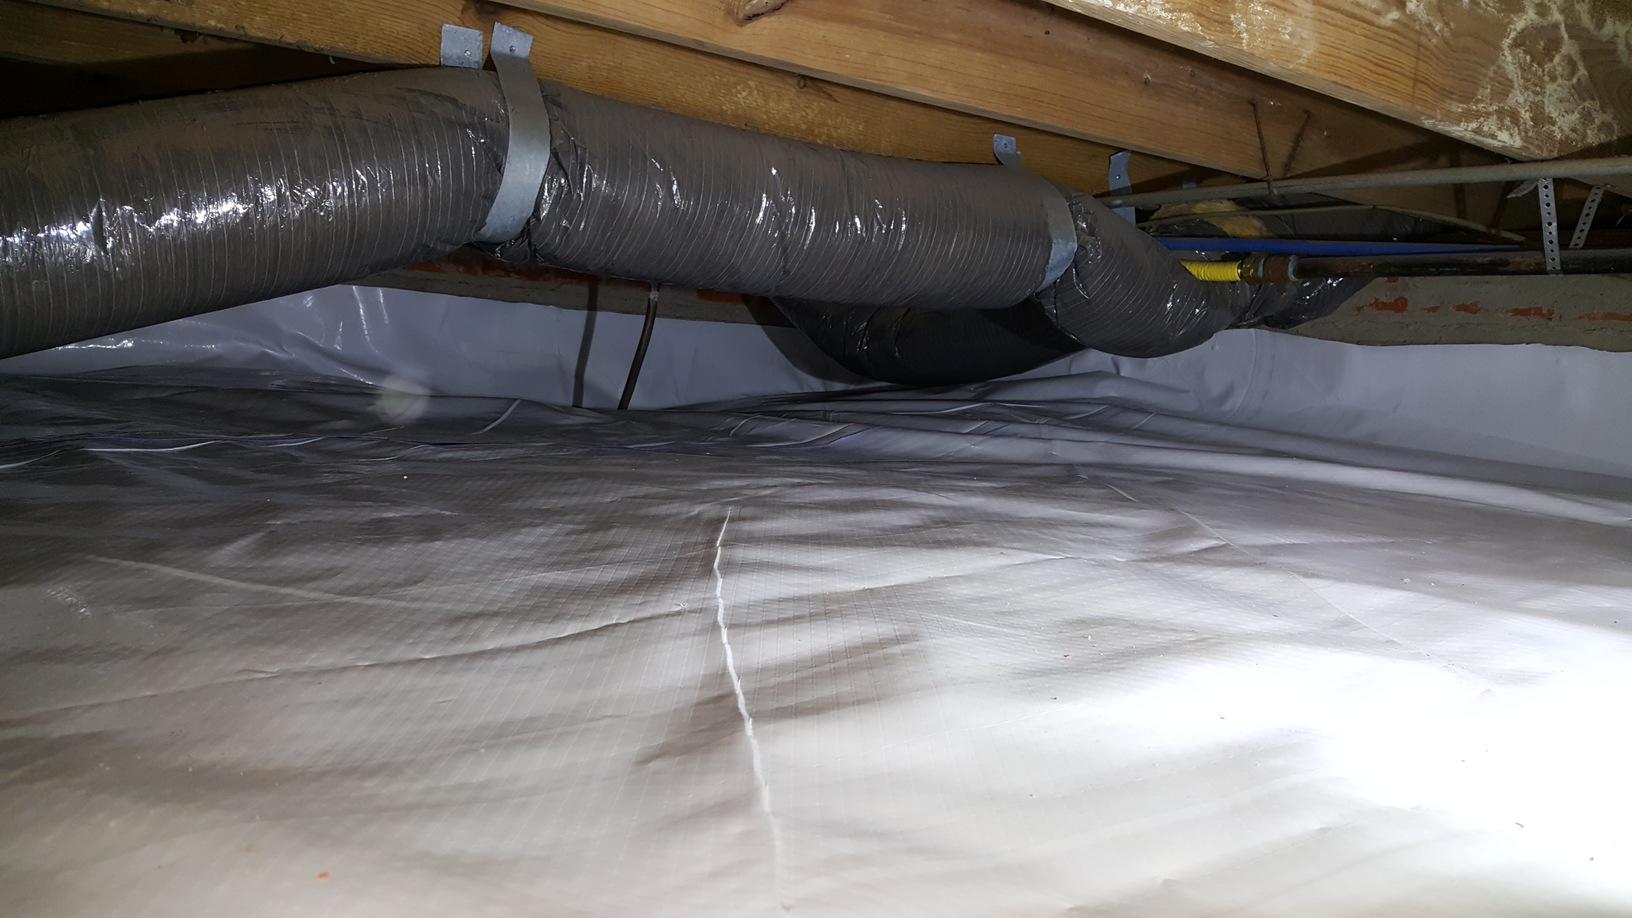 This home was expereincing moisture problems along the front of the home until Vesta Foundation Solutions sealed up their crawl space using the patented CleanSpace System.